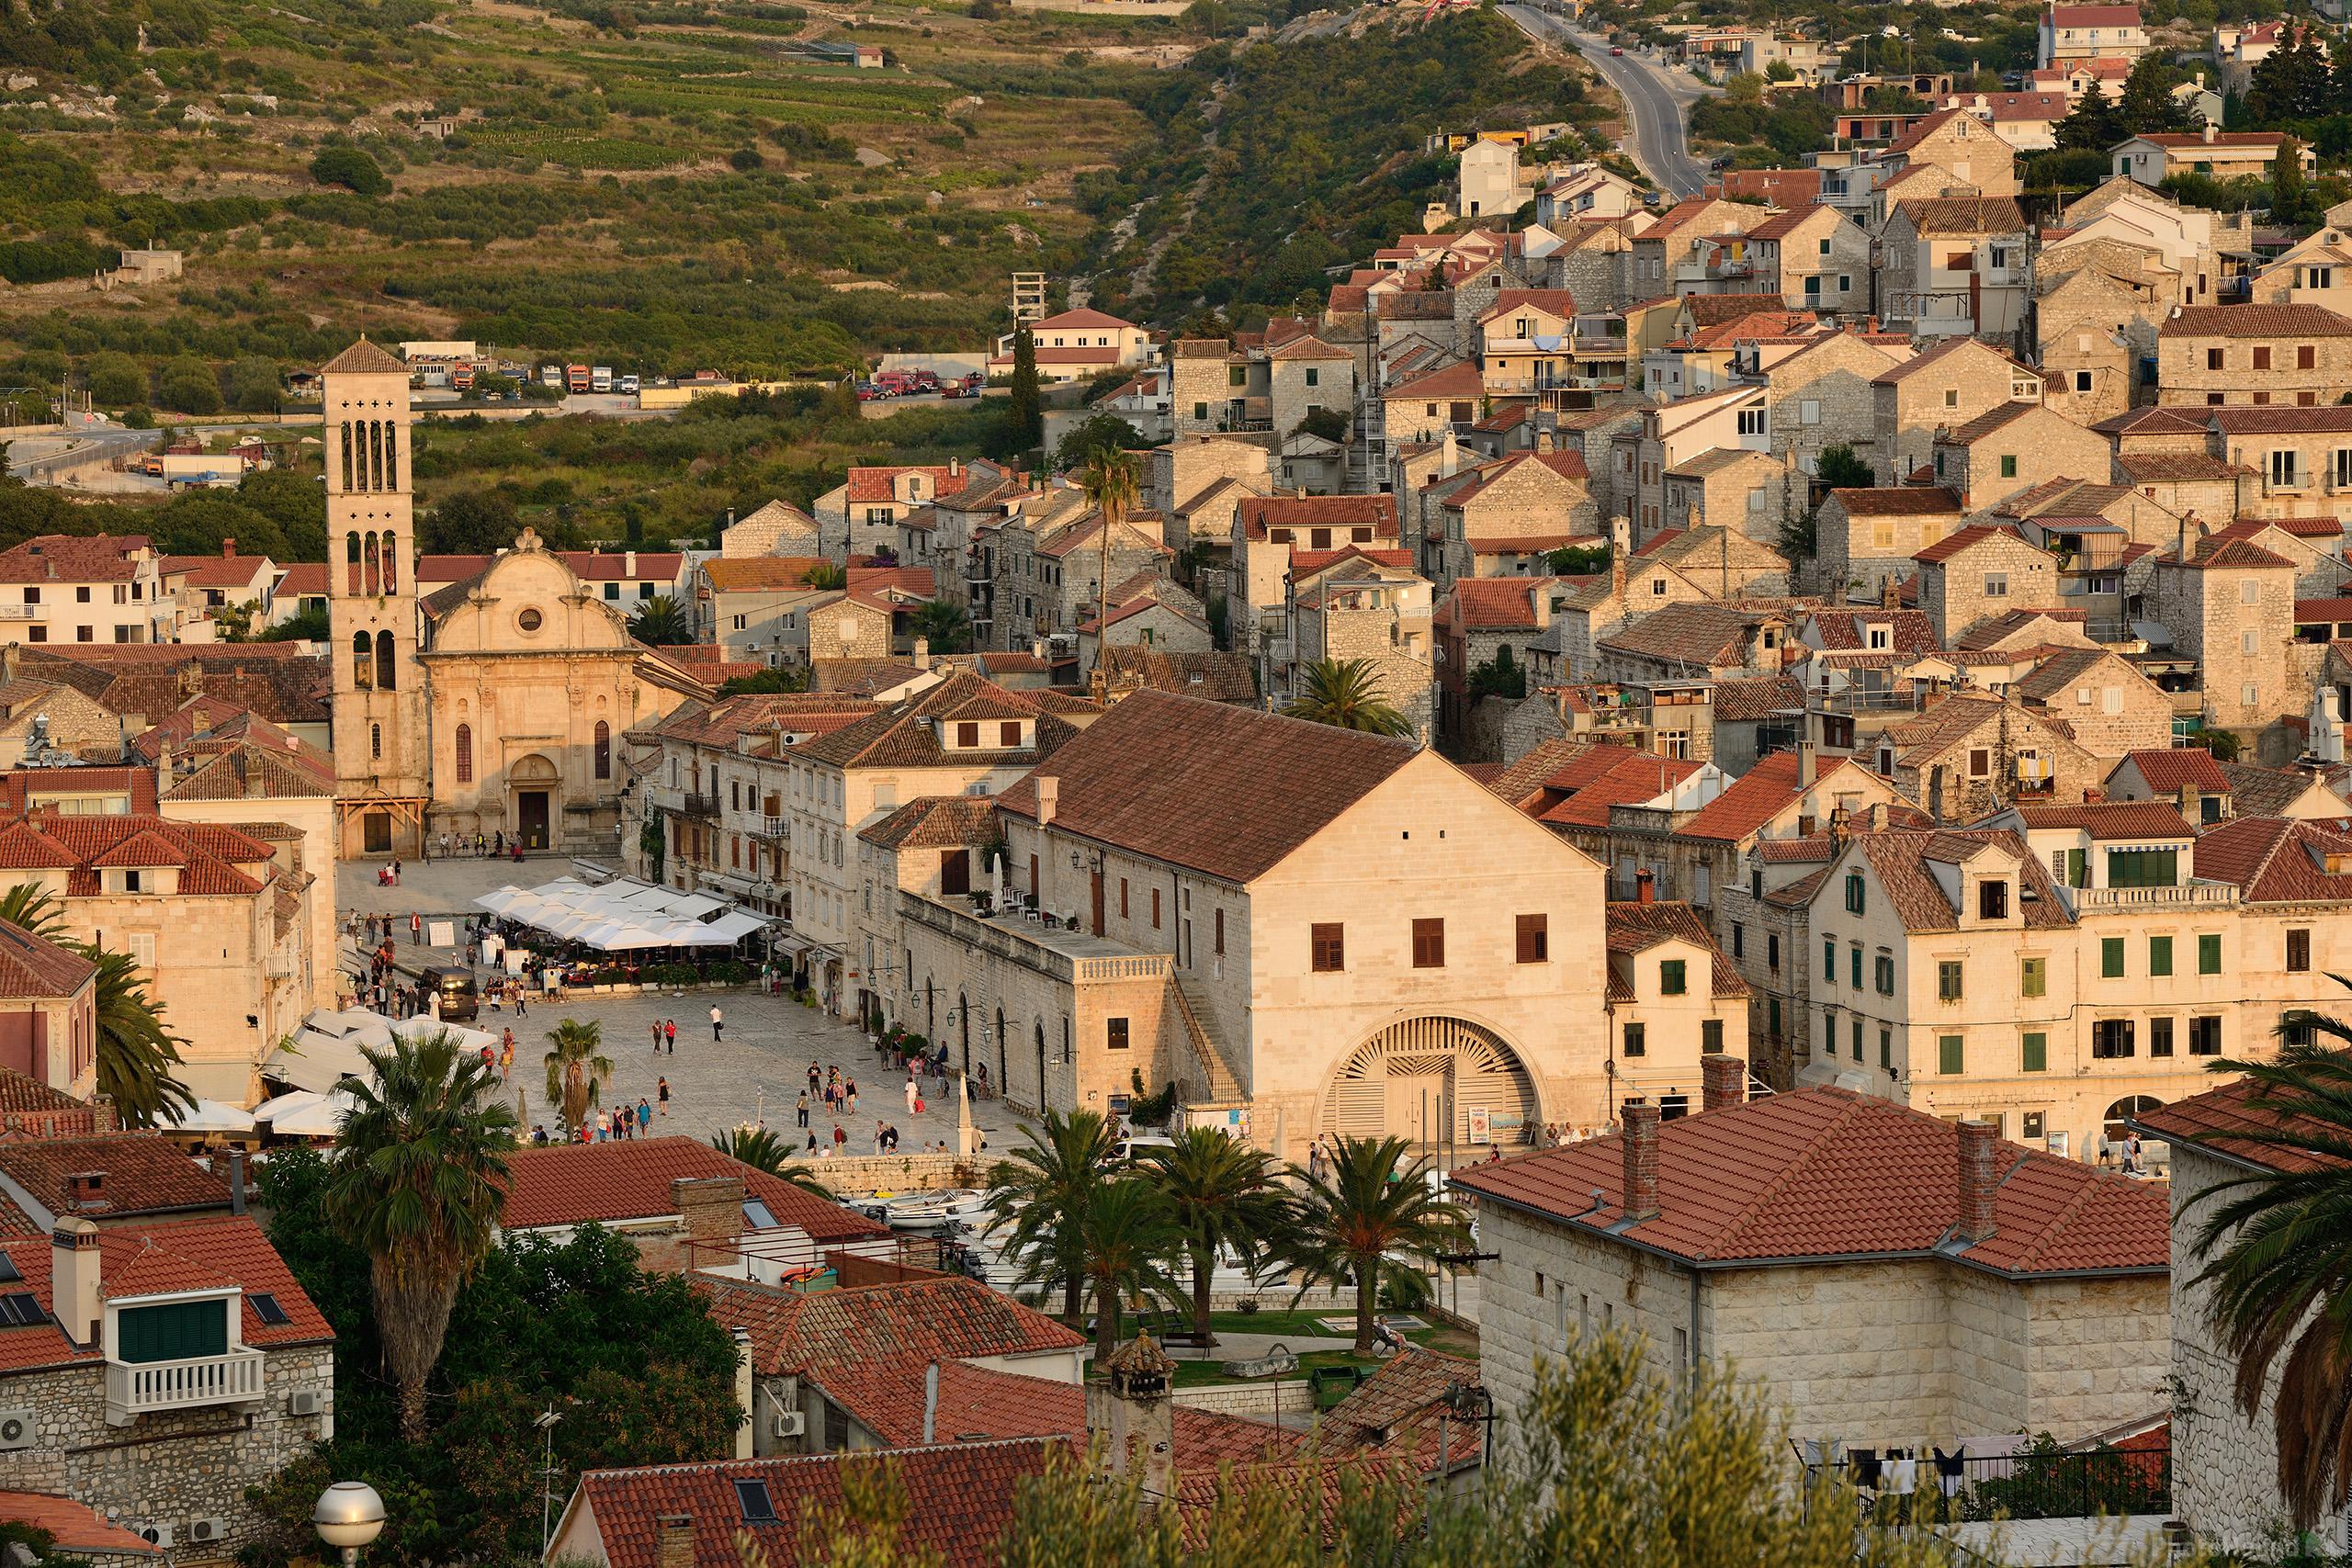 Image of Hvar Town Elevated Views by Luka Esenko